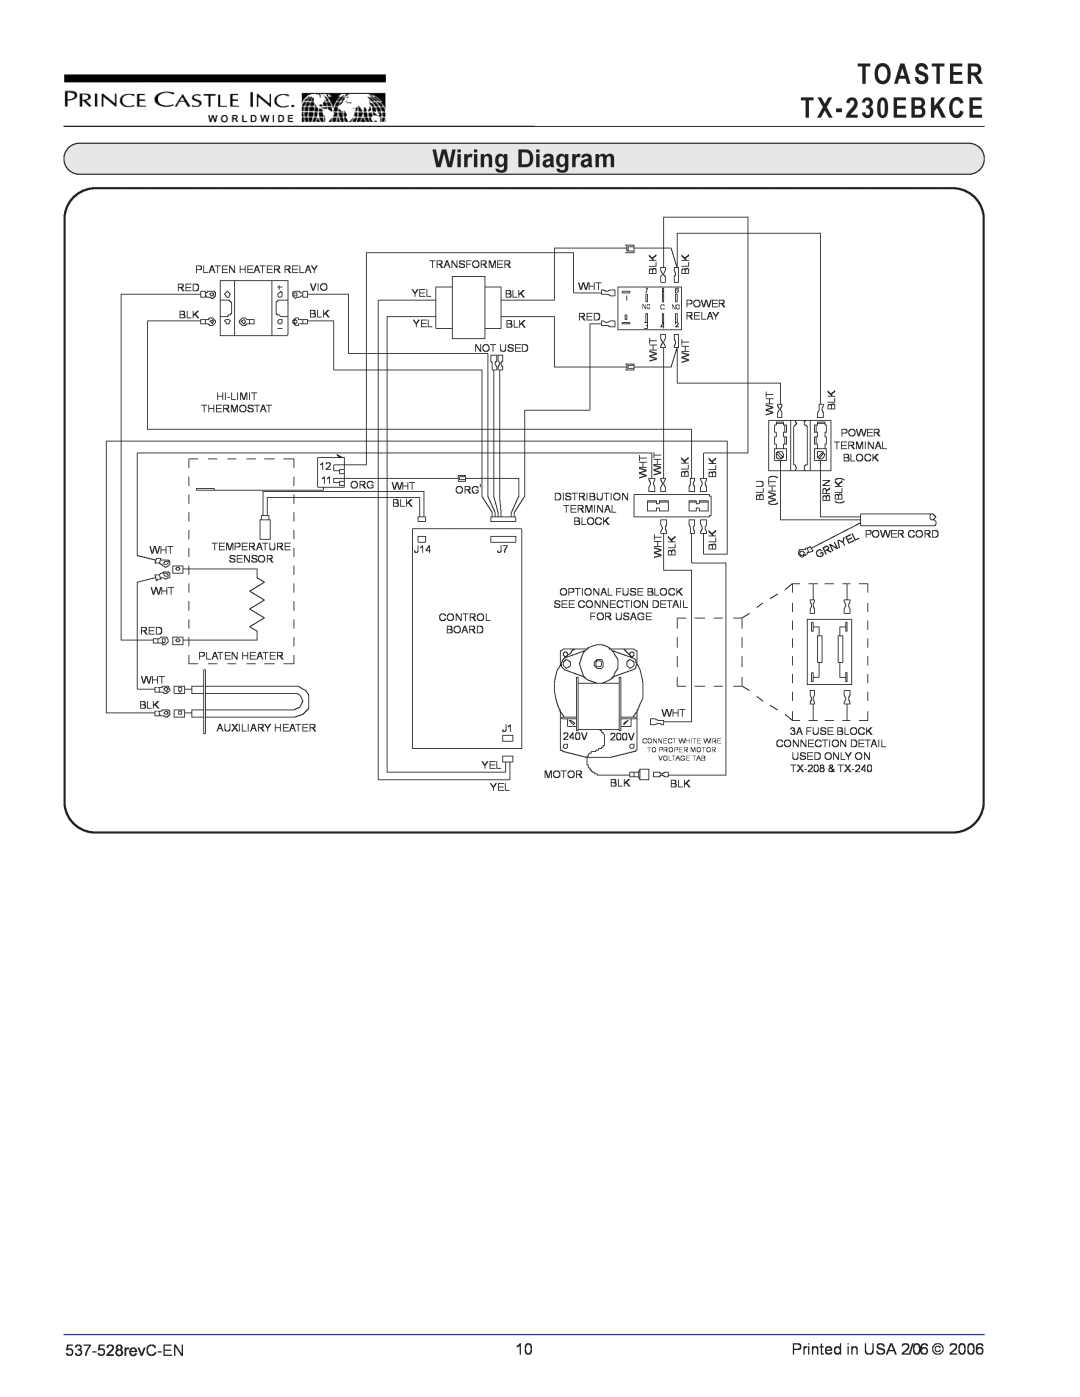 Prince Castle operation manual Wiring Diagram, TOASTER TX-230EBKCE 